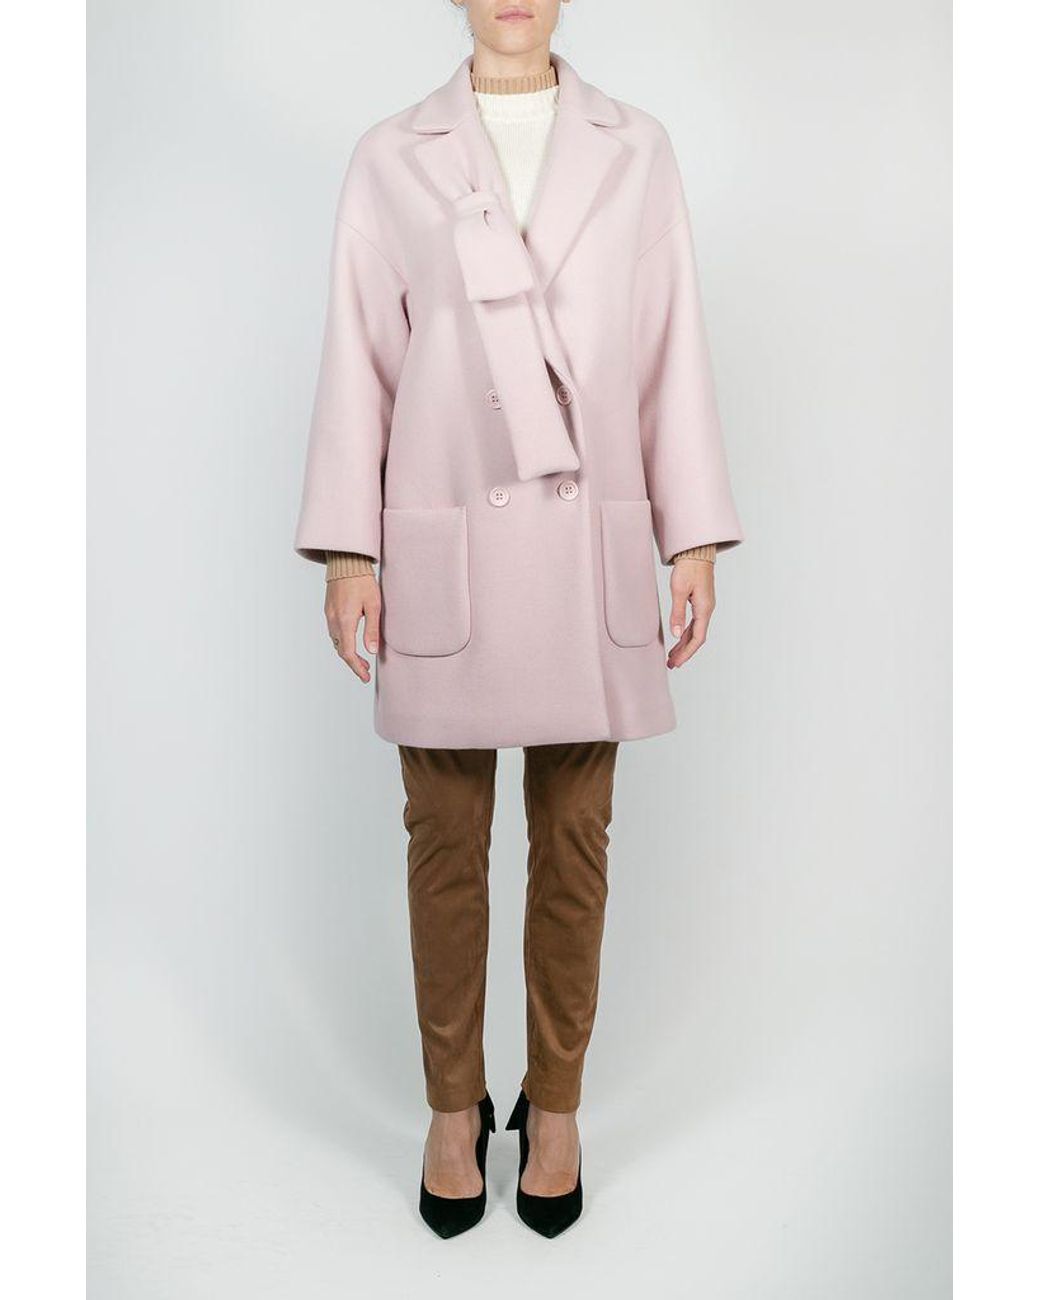 RED Valentino Valentino Coat With Bow in Red (Pink) - Lyst